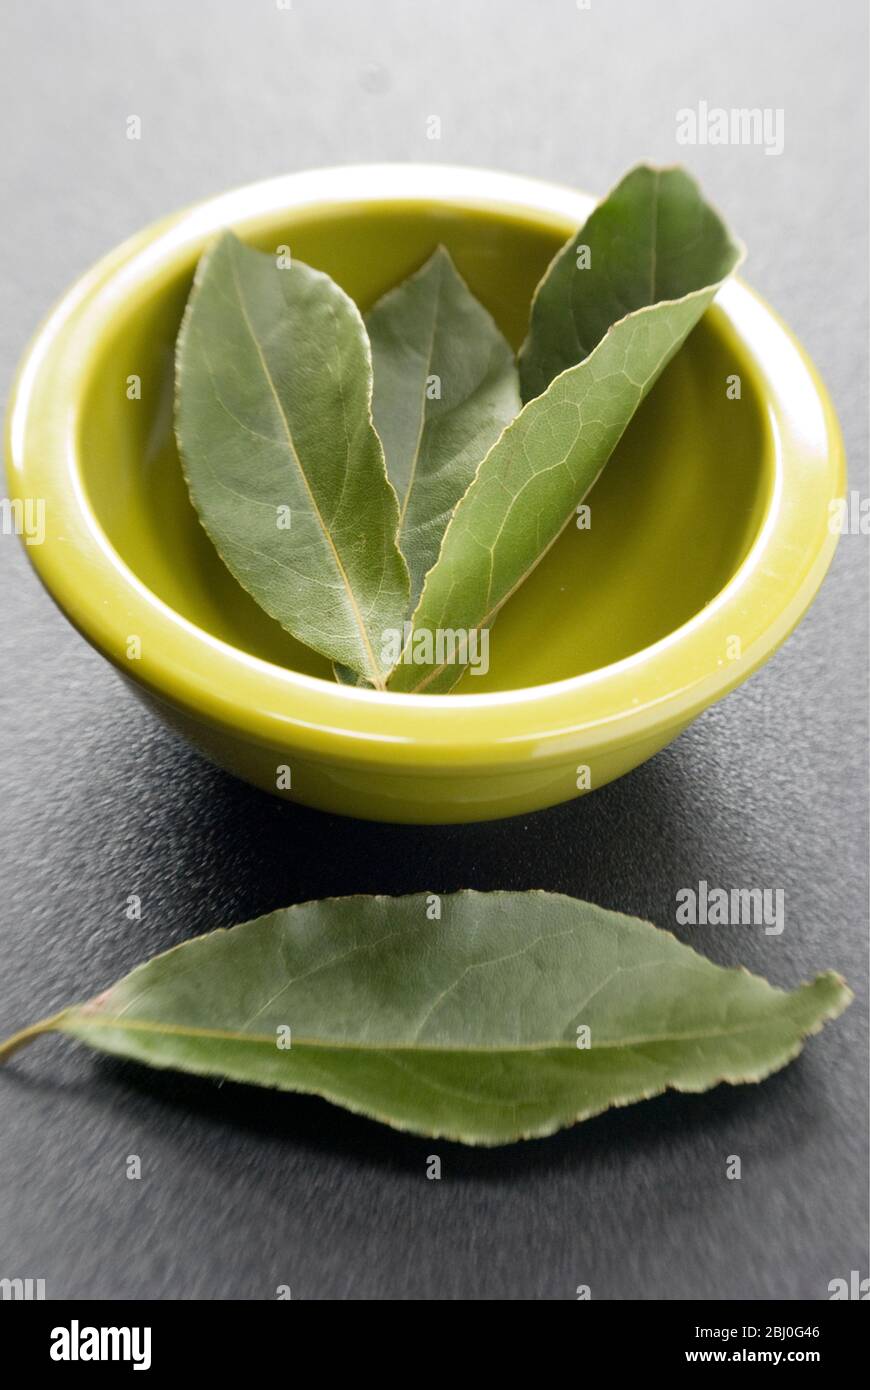 Bay leaves with small bowl on a dark plastic surface. Bay leaf (Greek Daphni, Romanian Foi de Dafin) is the aromatic leaf of several species of the La Stock Photo